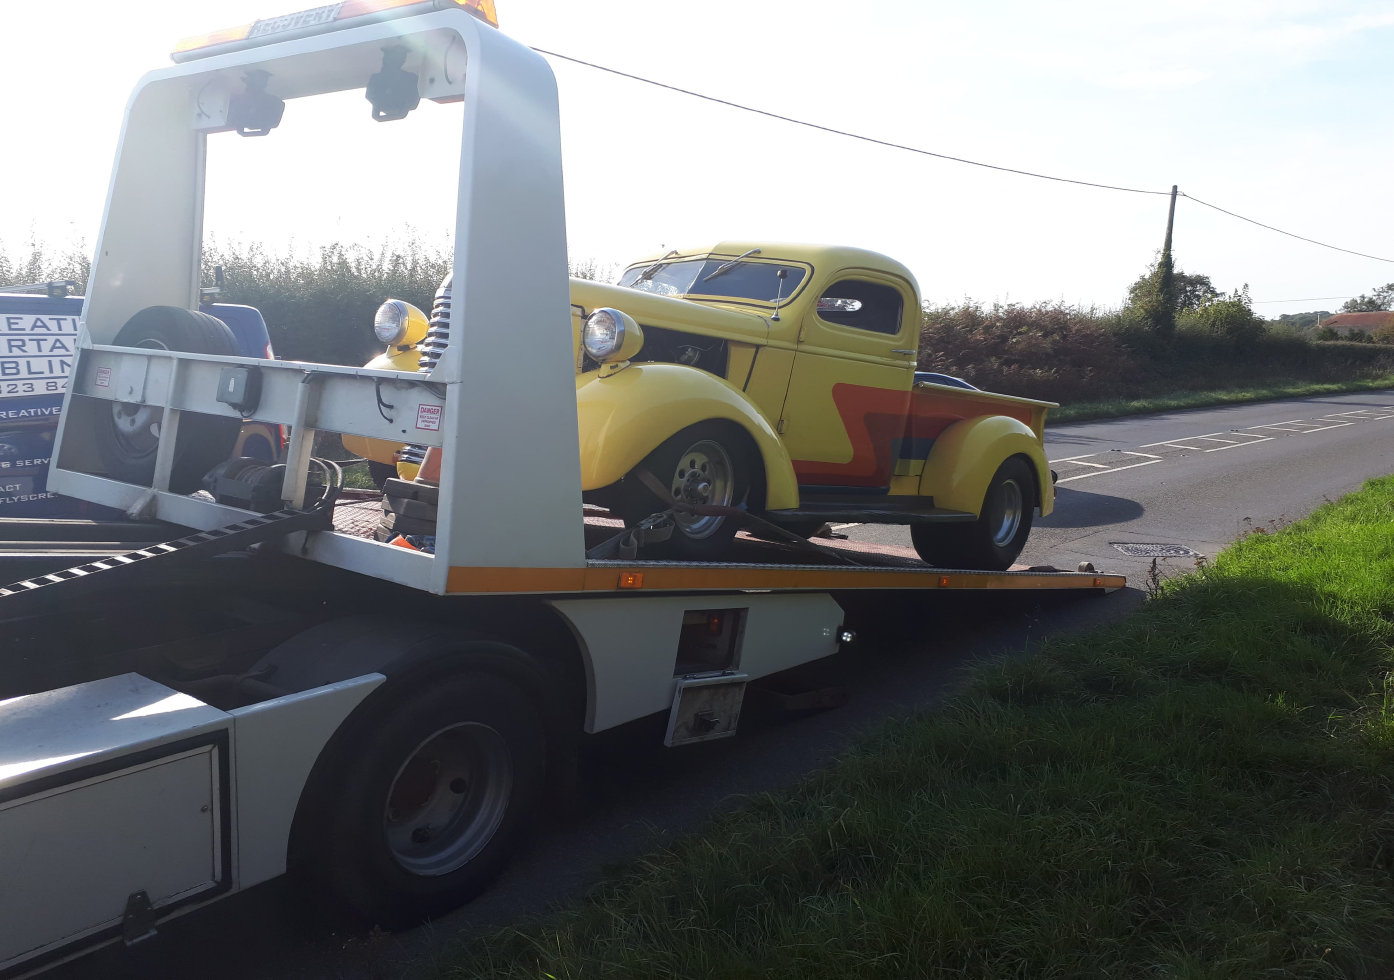 eastbourne-recovery-american-car